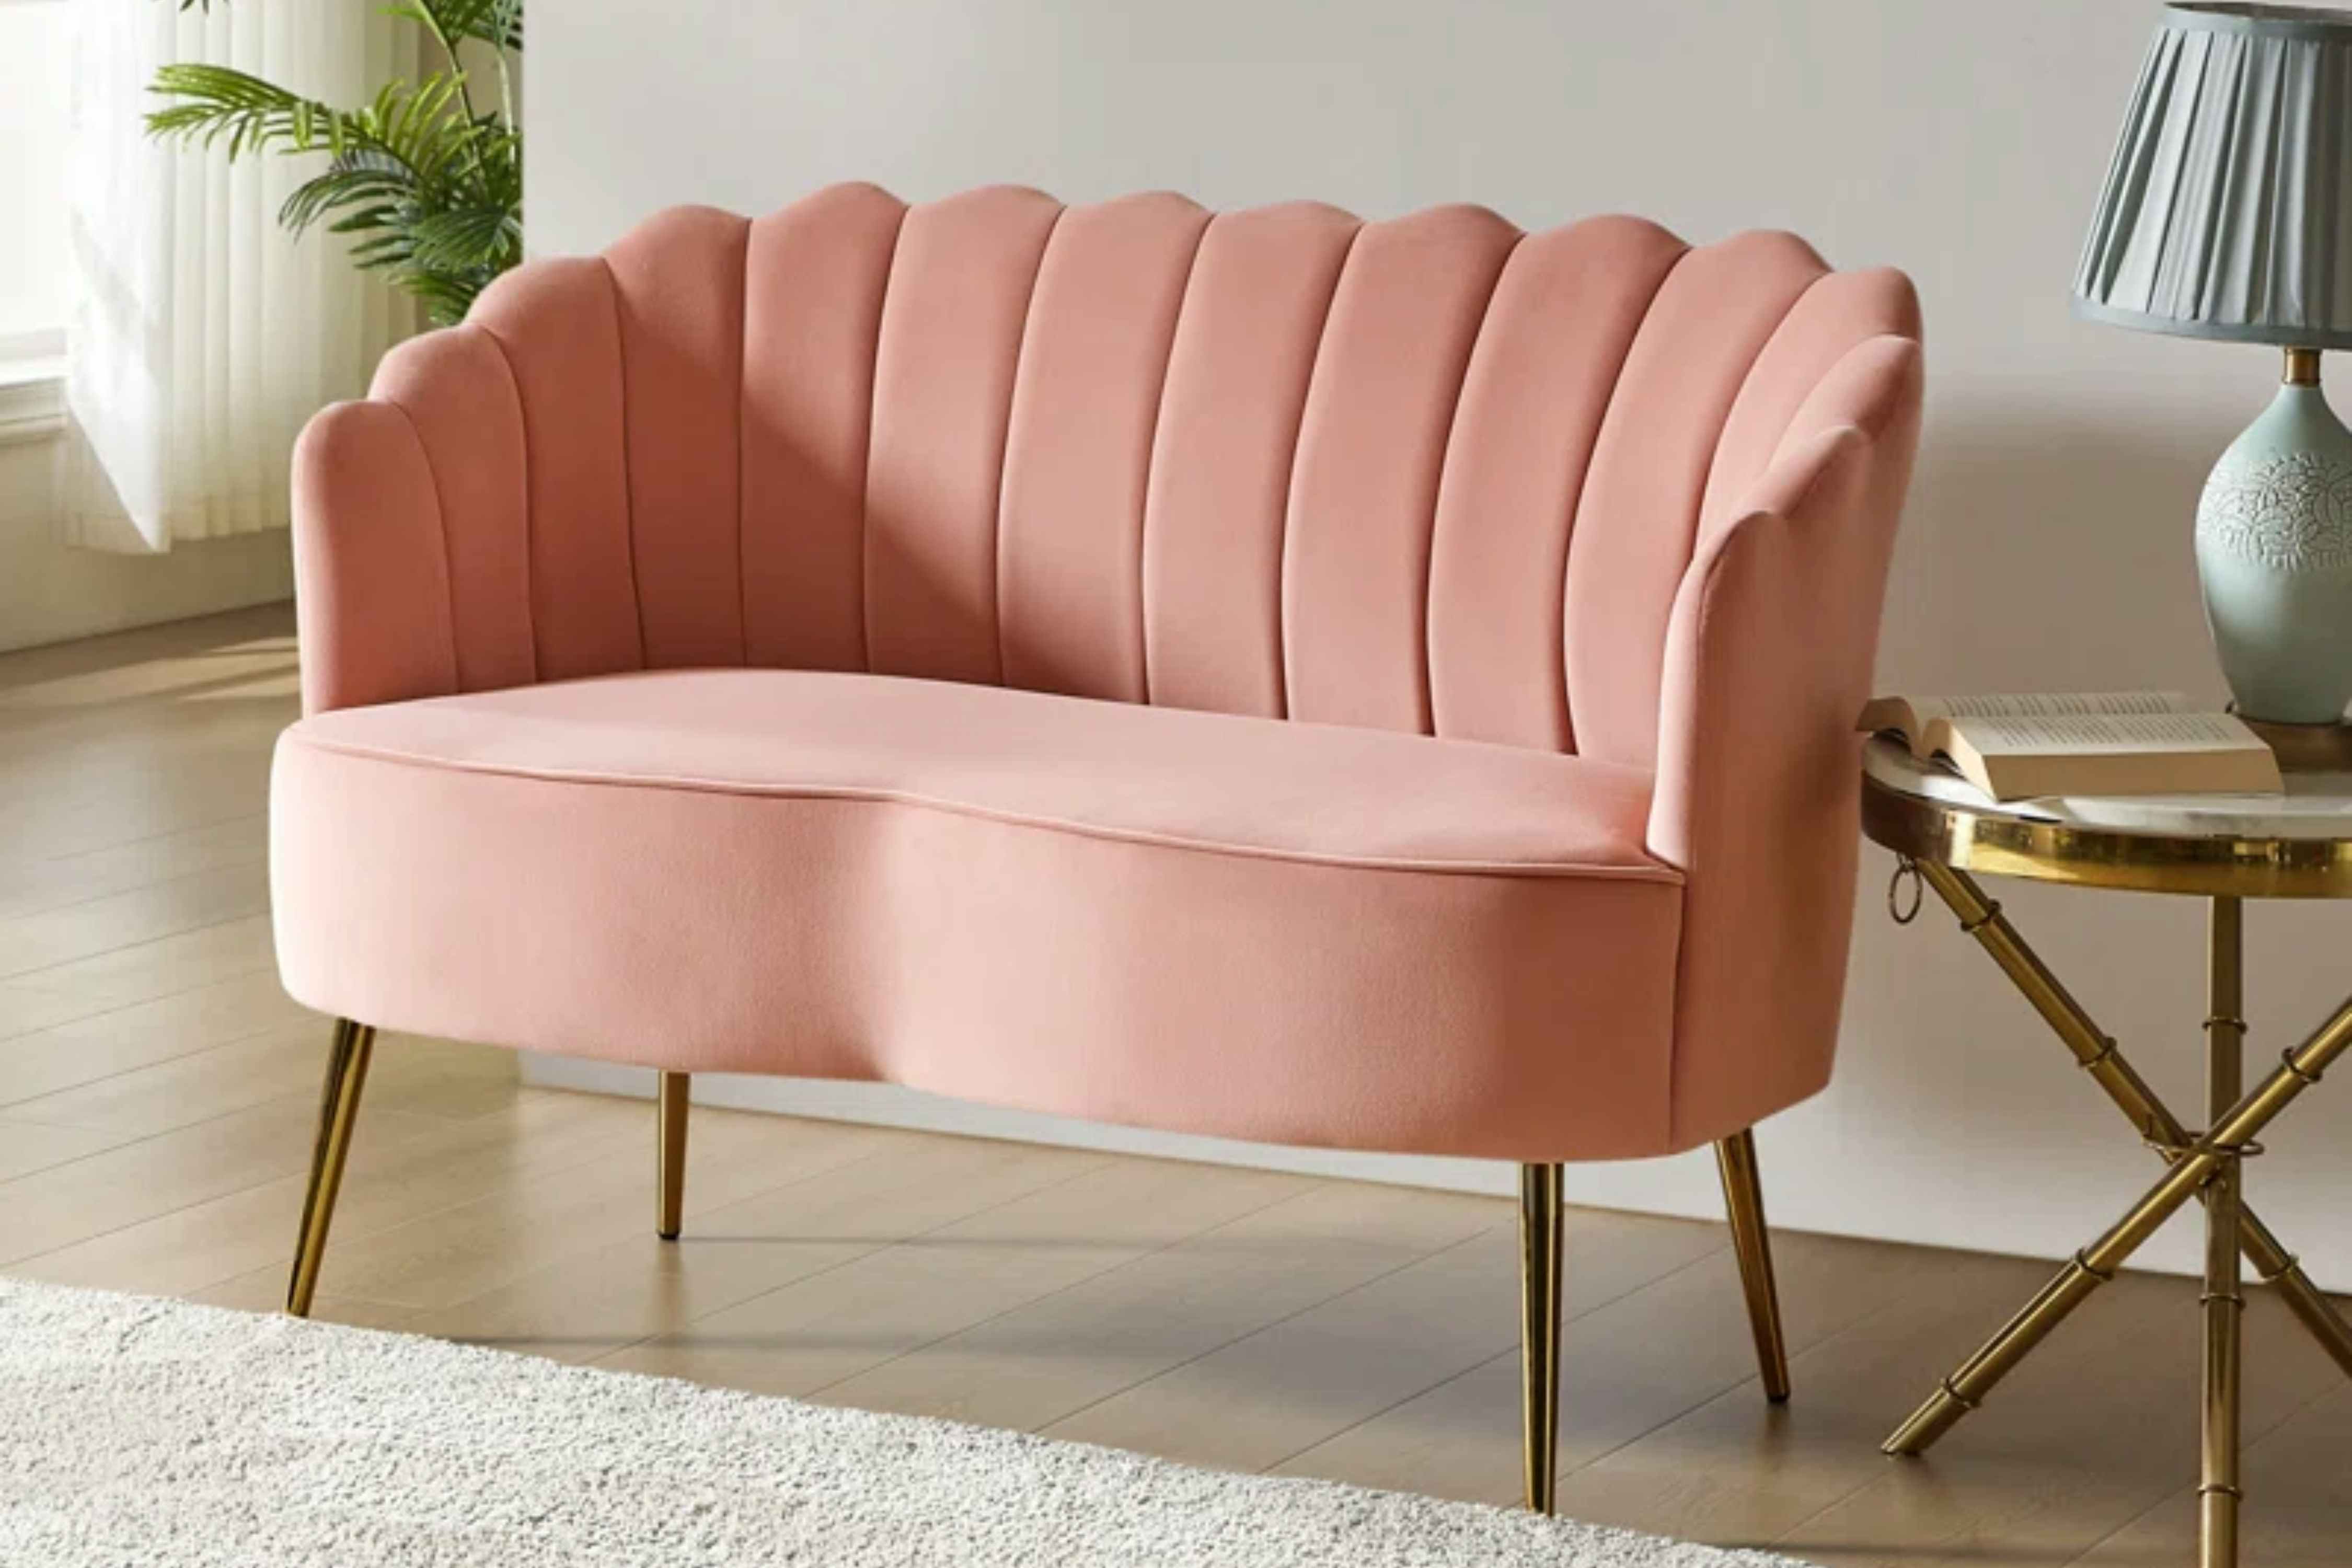 Get This $799 Upholstered Loveseat for as Low as $160 at Wayfair